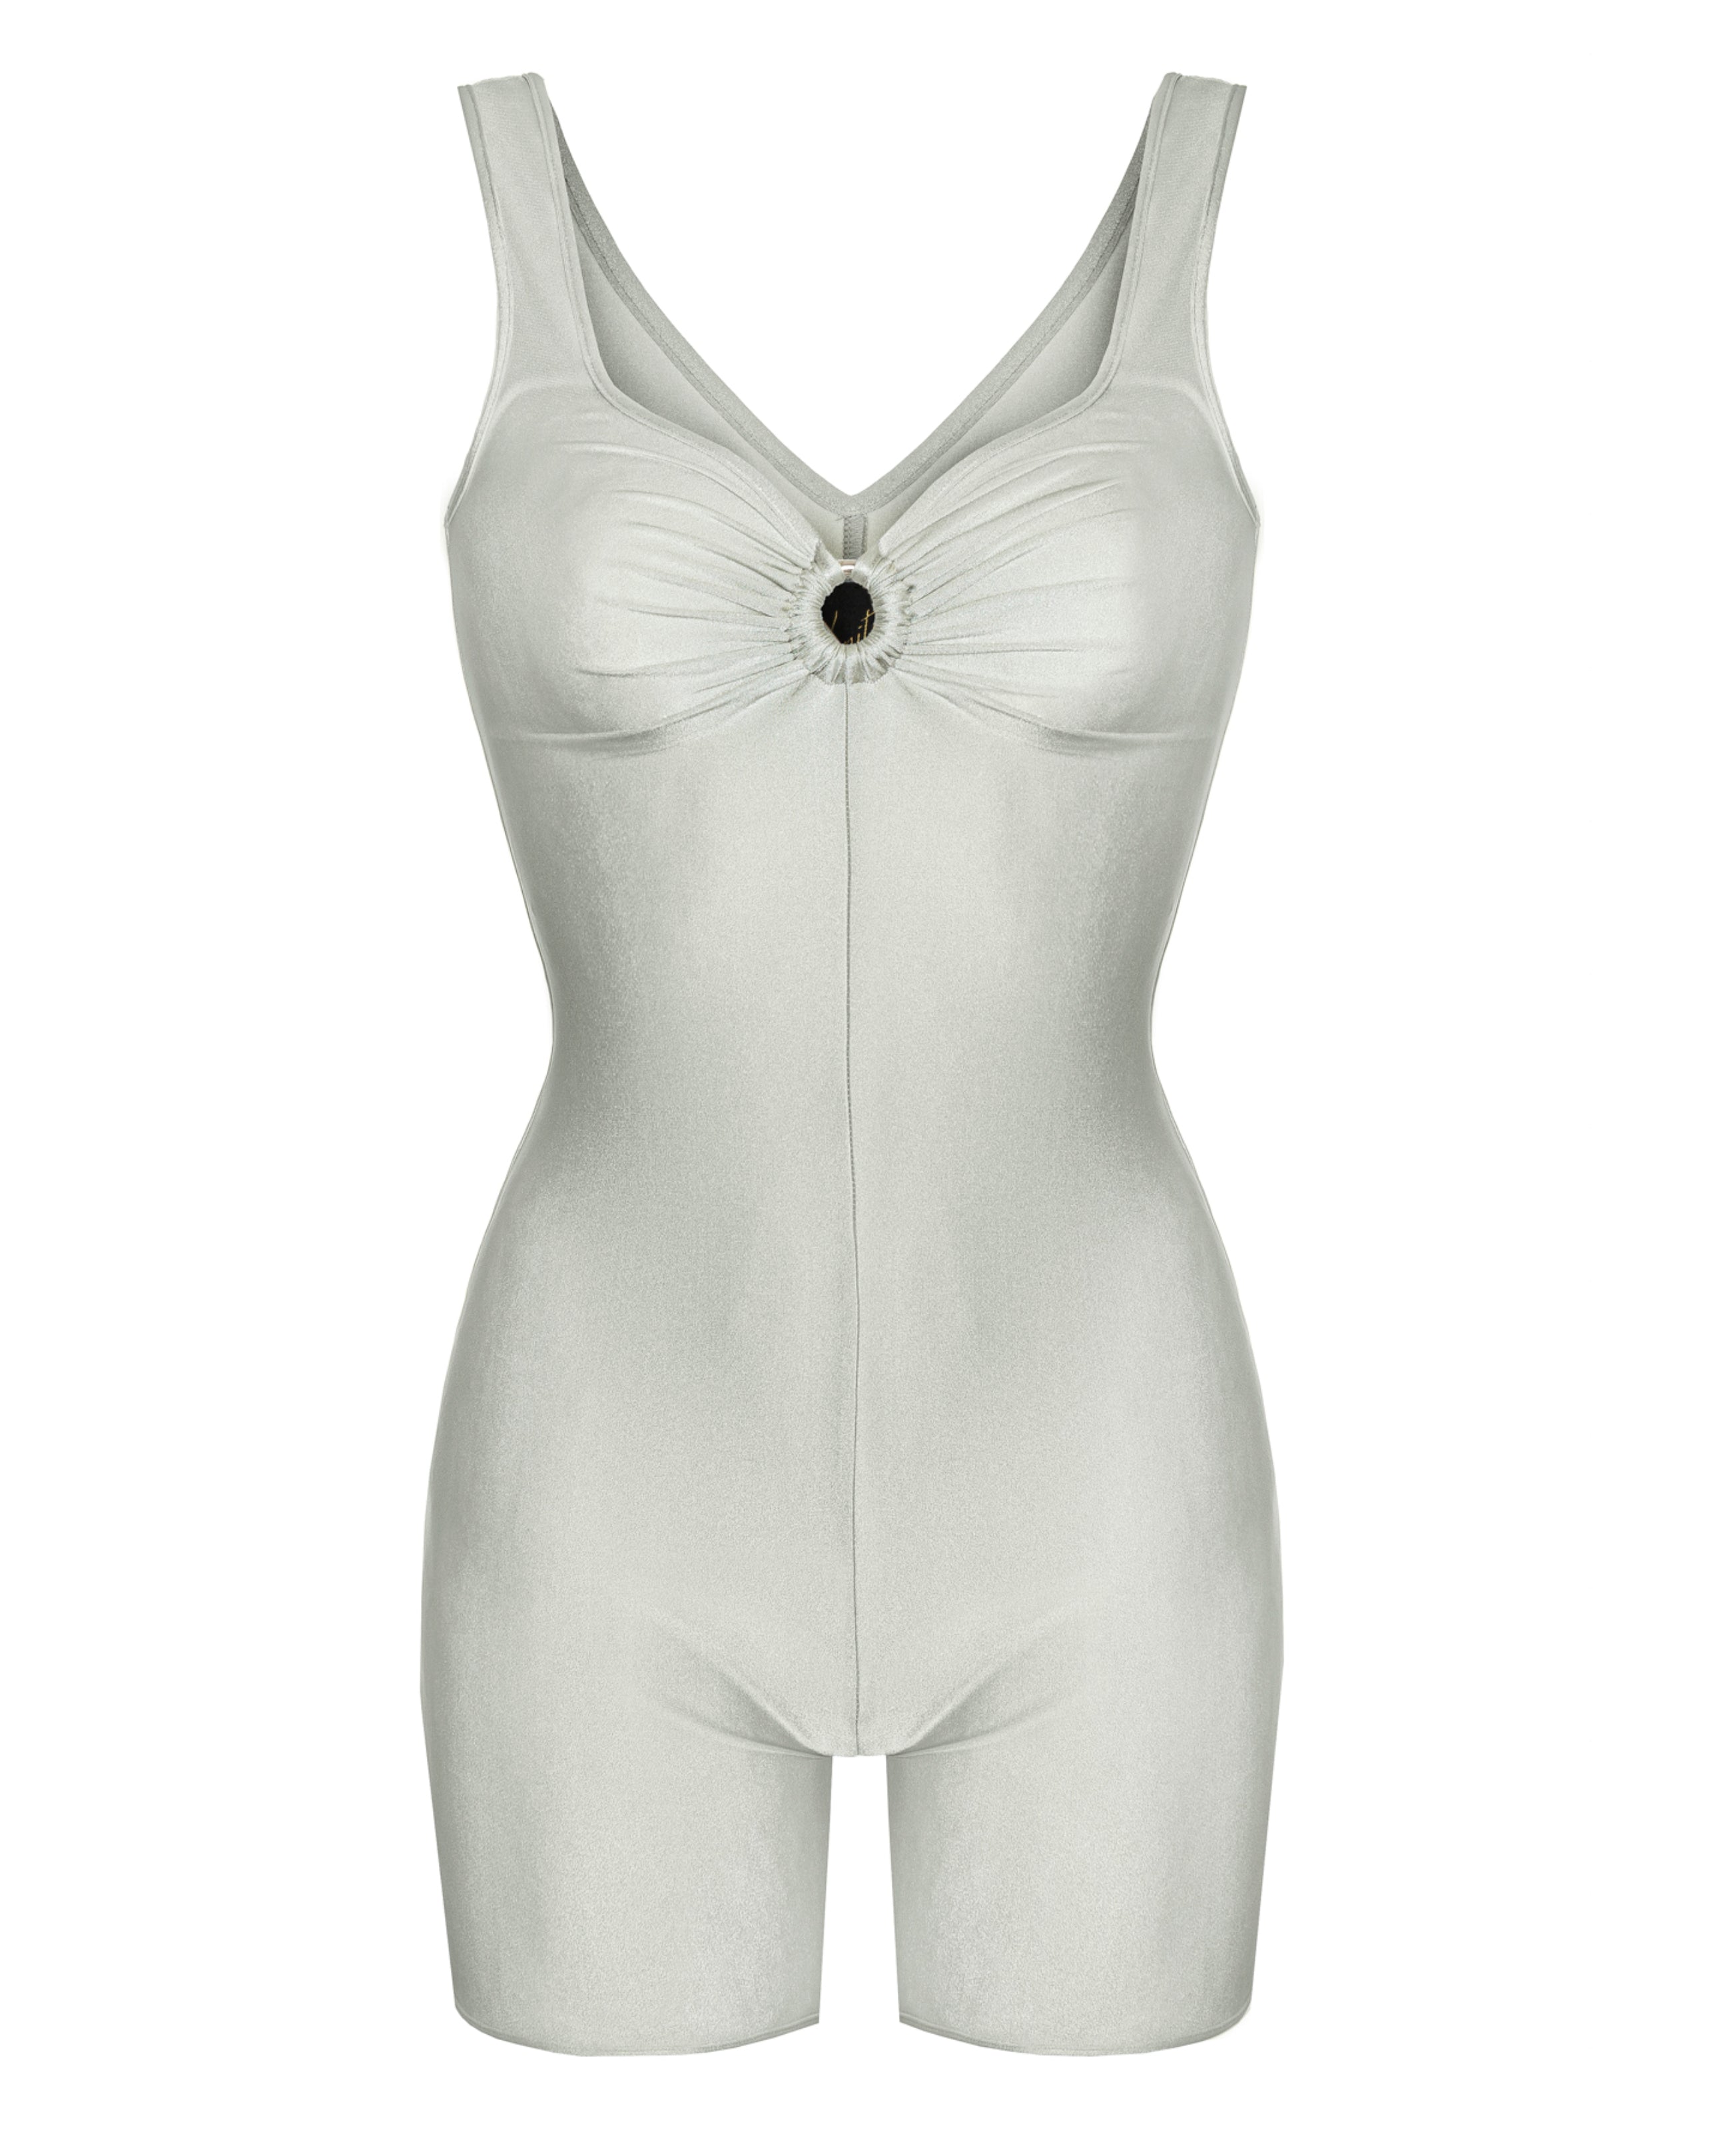 Olympus catsuit silver